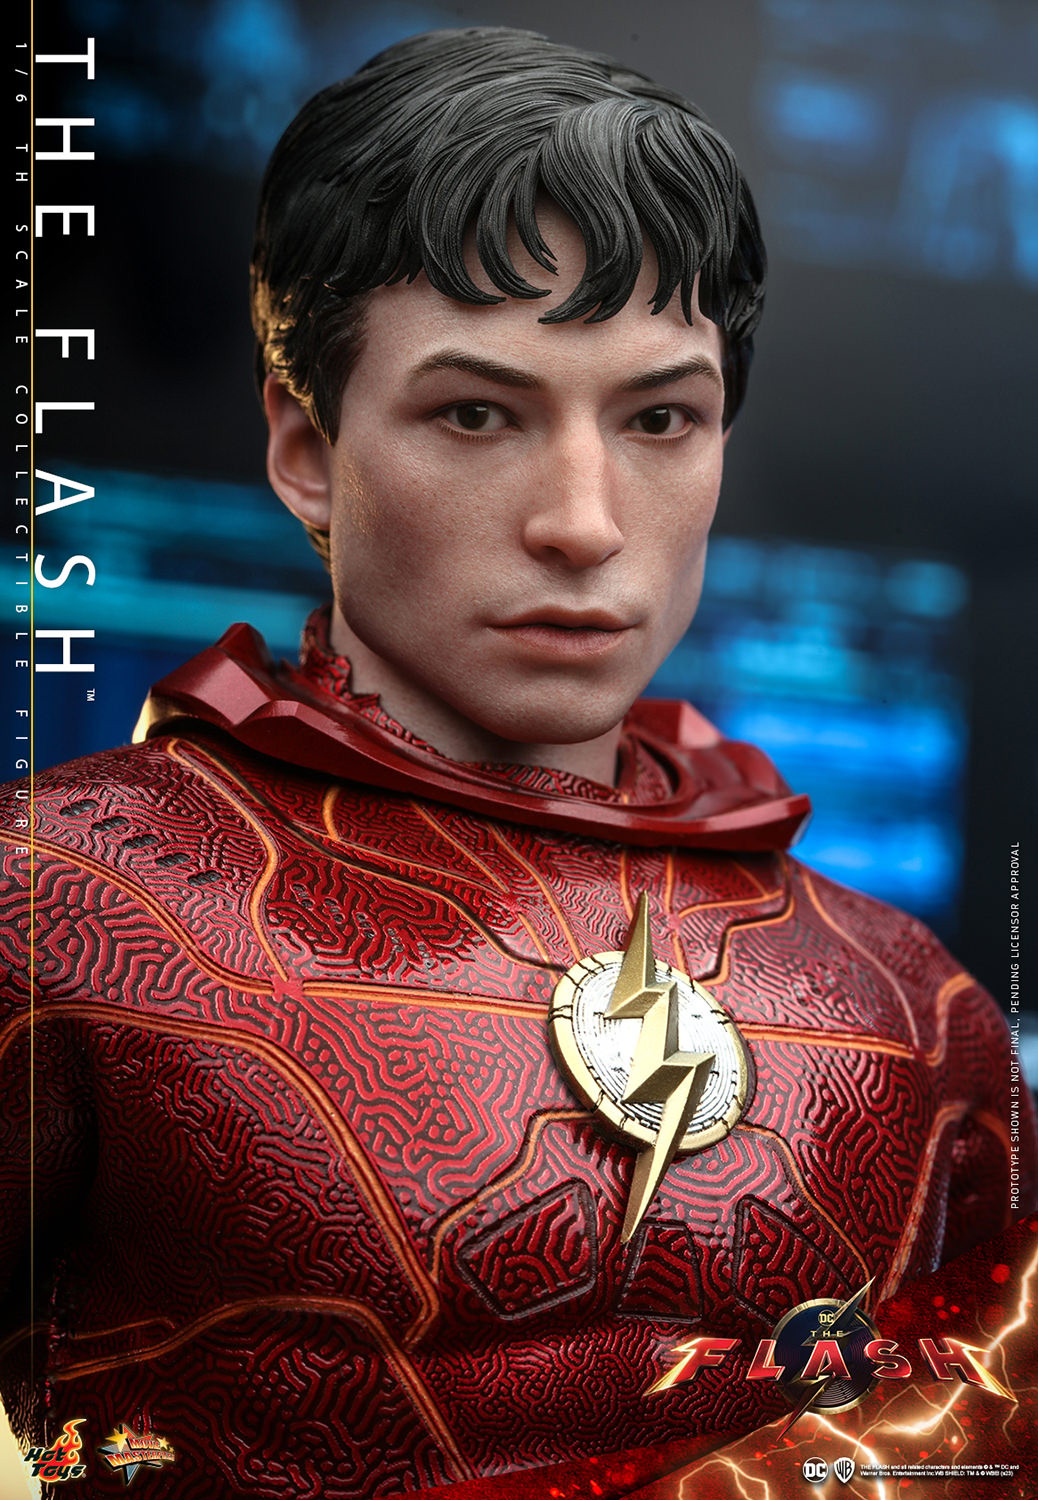 The Flash (Special Edition) (Prototype Shown) View 13